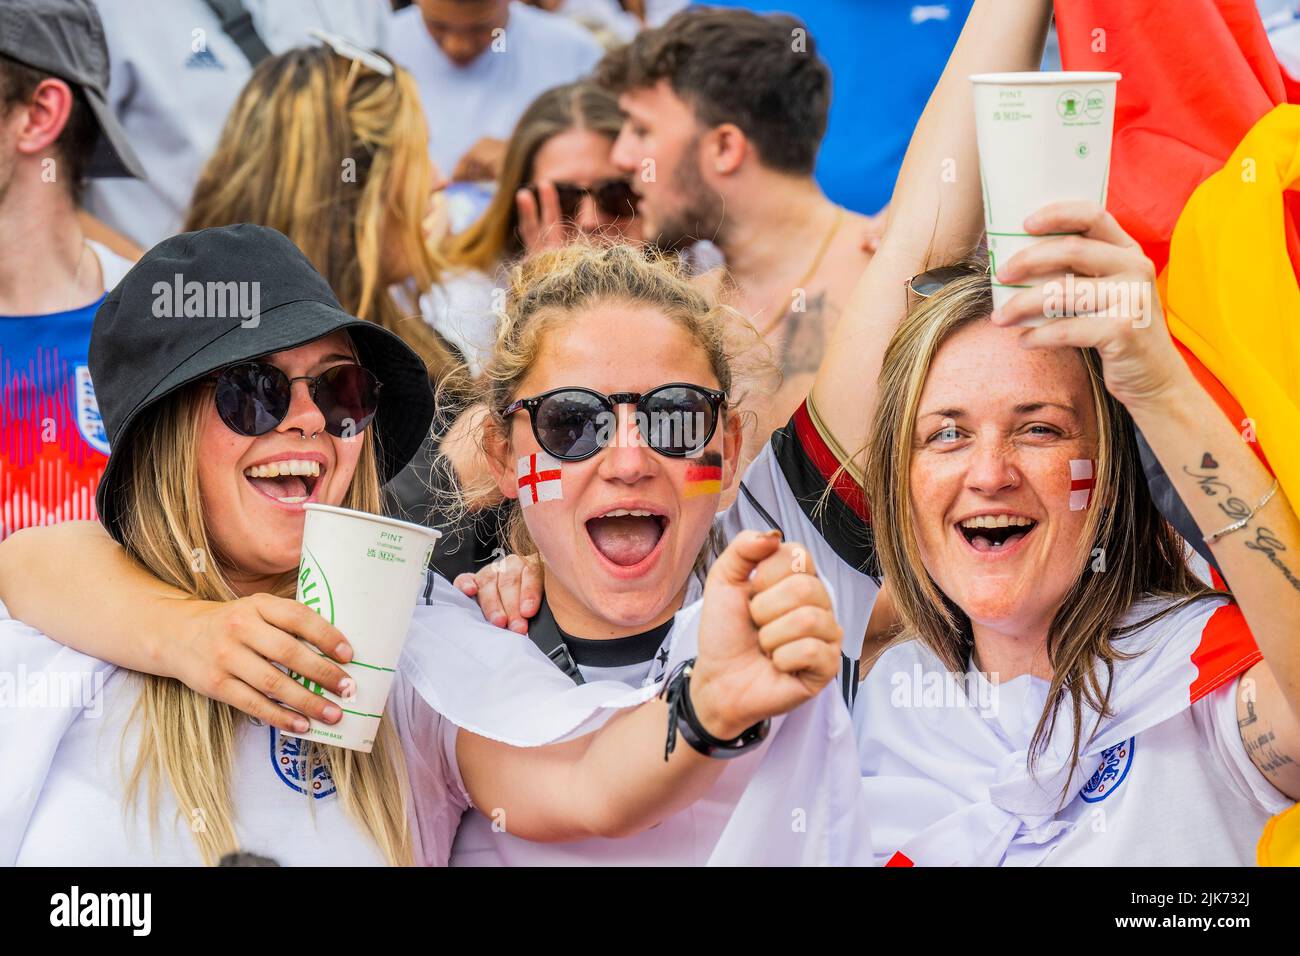 London, UK. 31st July, 2022. England v Germany UEFA Women's EURO 2022 final match fanzone in Trafalgar Square. Organised by the Mayor of London Sadiq Khan, and tournament organisers. It offered free access for up to 7,000 supporters. Credit: Guy Bell/Alamy Live News Stock Photo